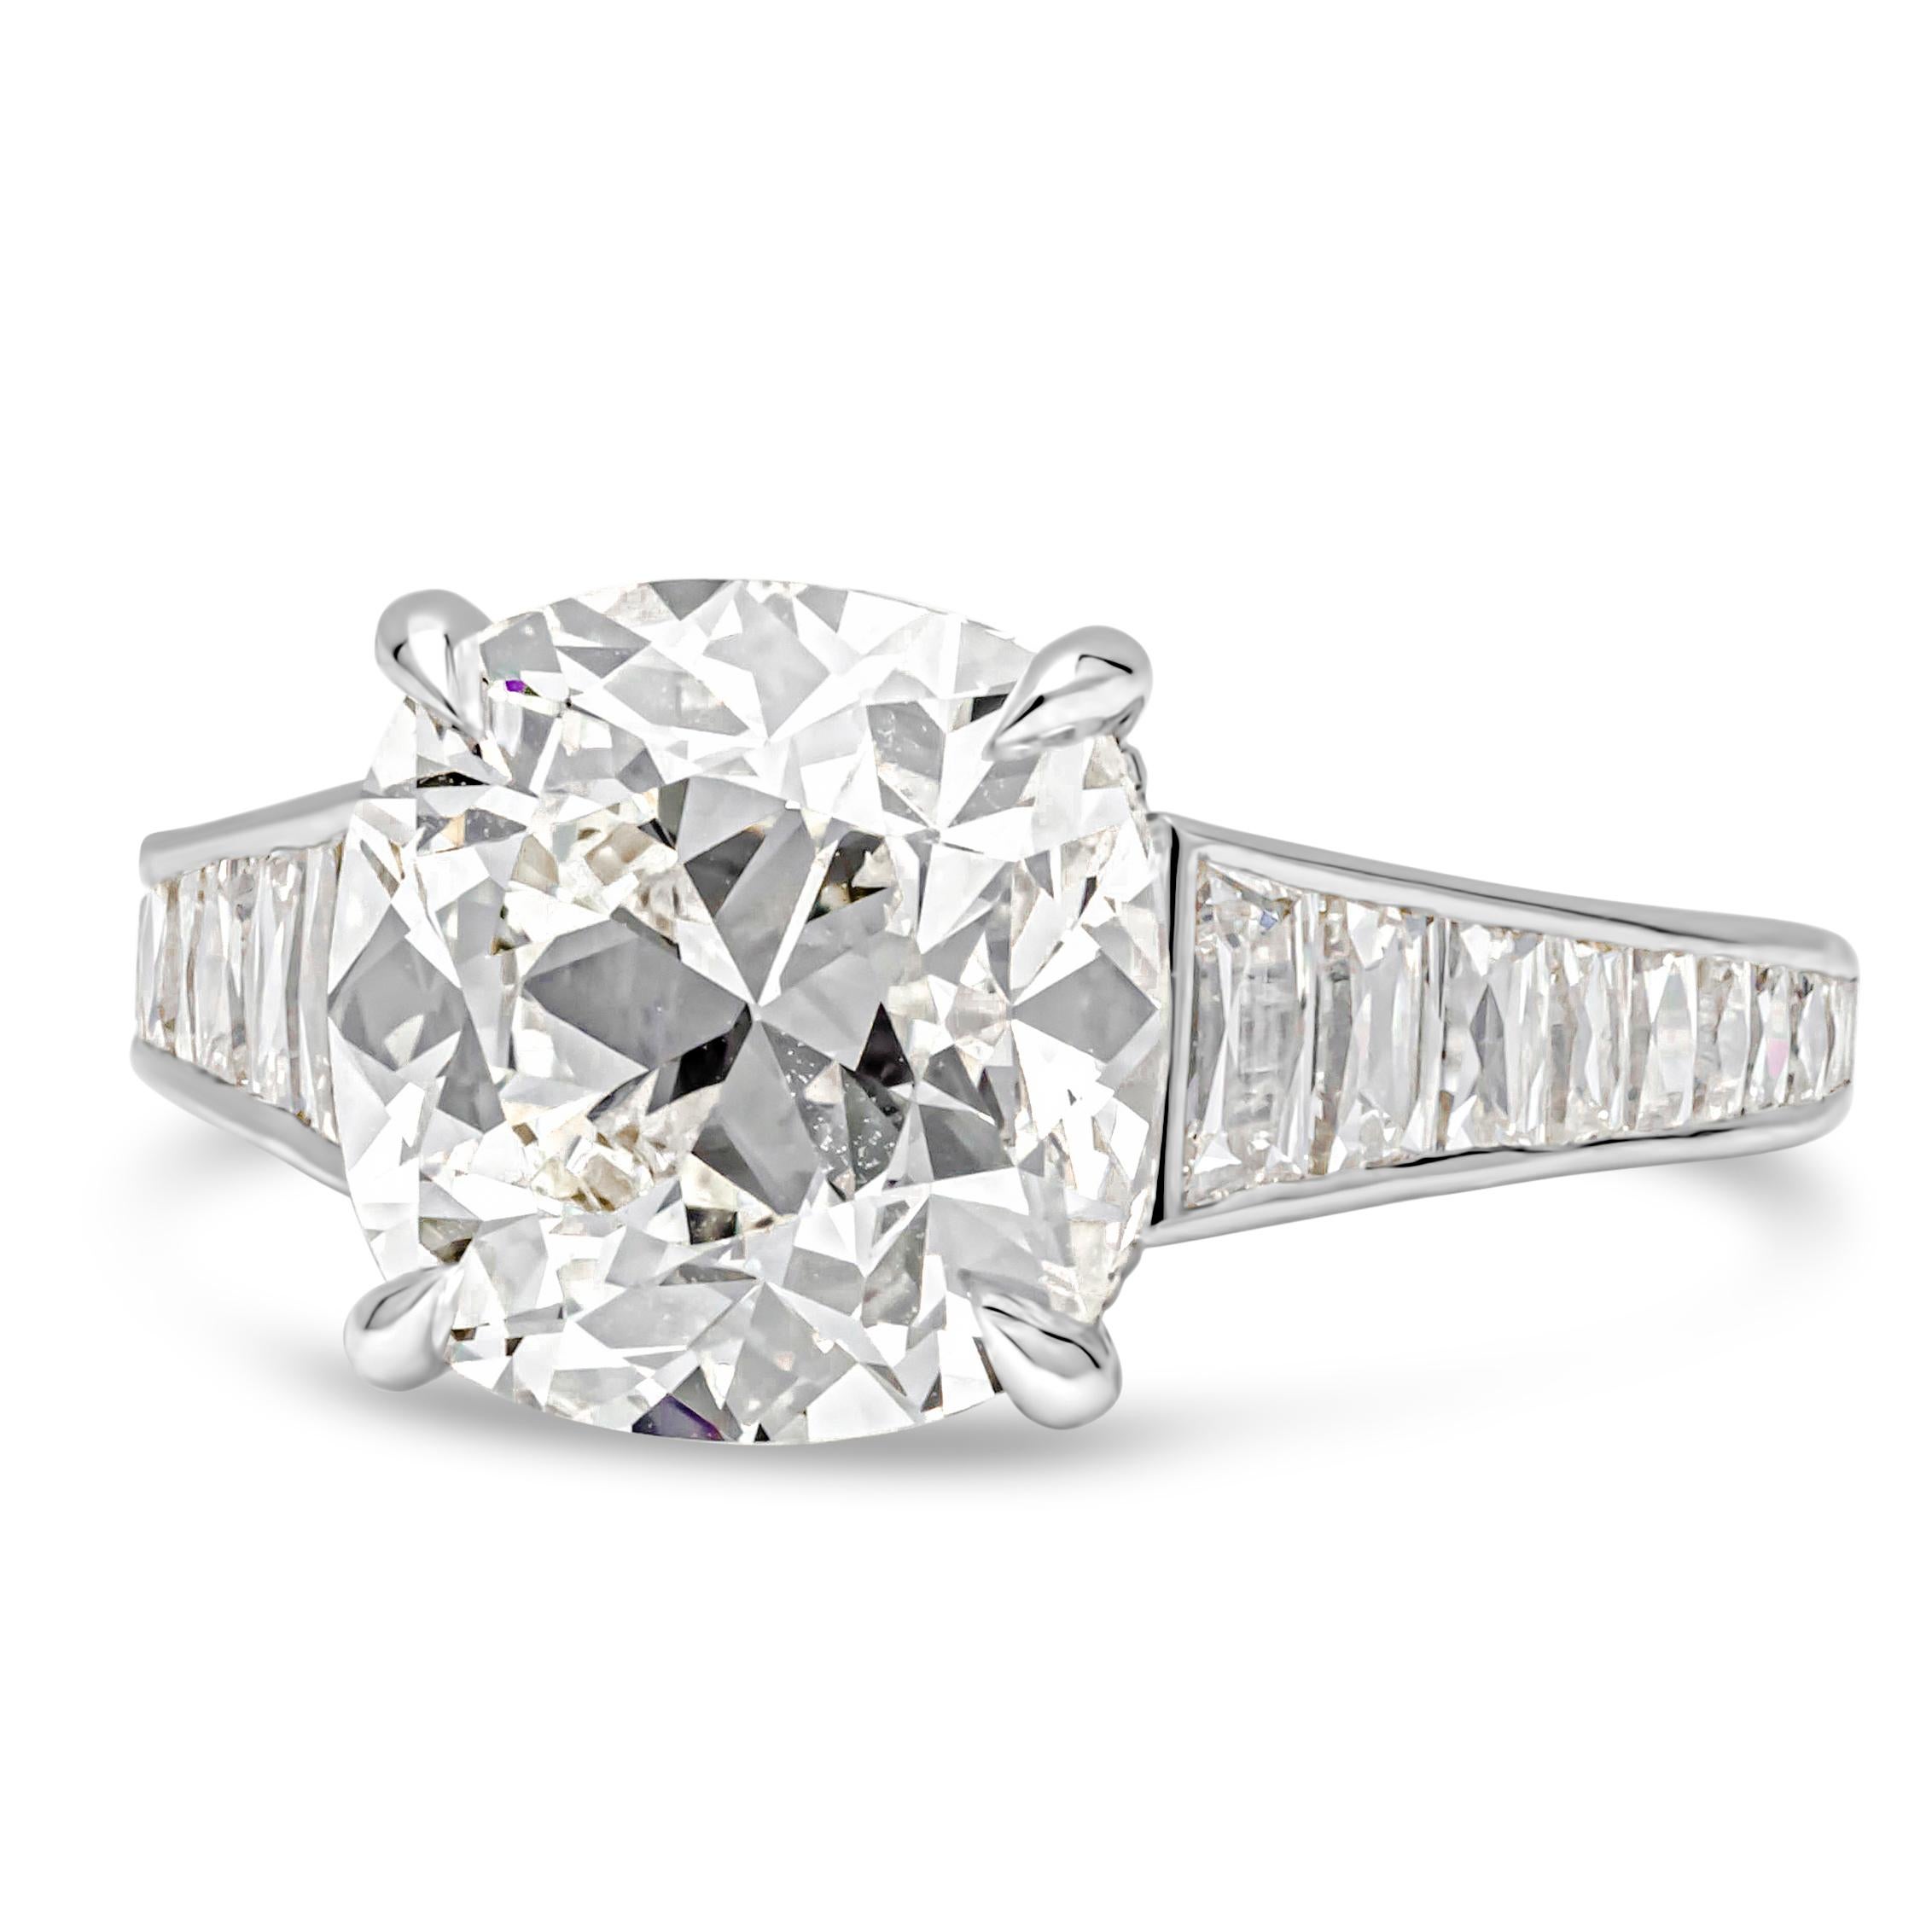 A stunning and well-crafted engagement ring, featuring a beautiful 5.42 carats cushion cut diamond certified by GIA as J color and VS1 clarity, set on a classic four prong basket setting. Flanking the center stone are 1.00 carat of French cut